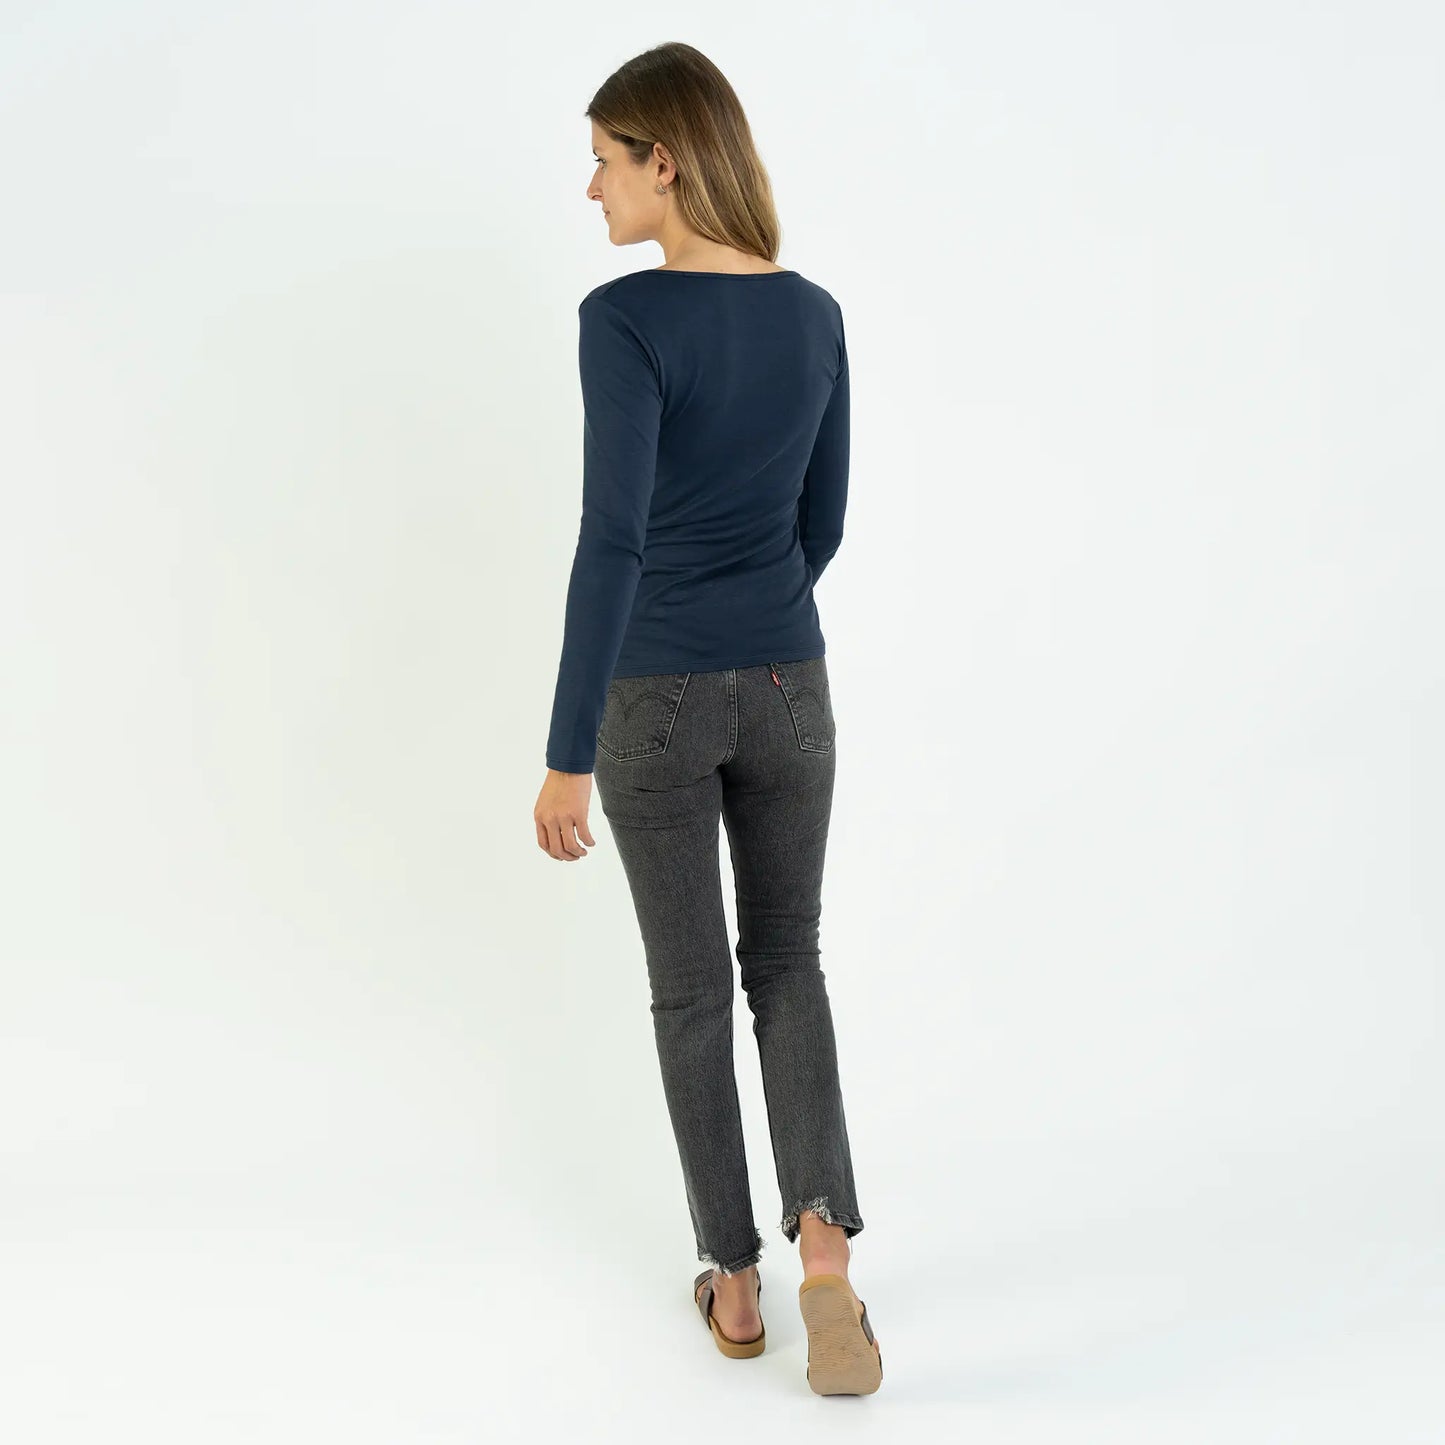 womens sustainable brand scoop neck long sleeve color navy blue